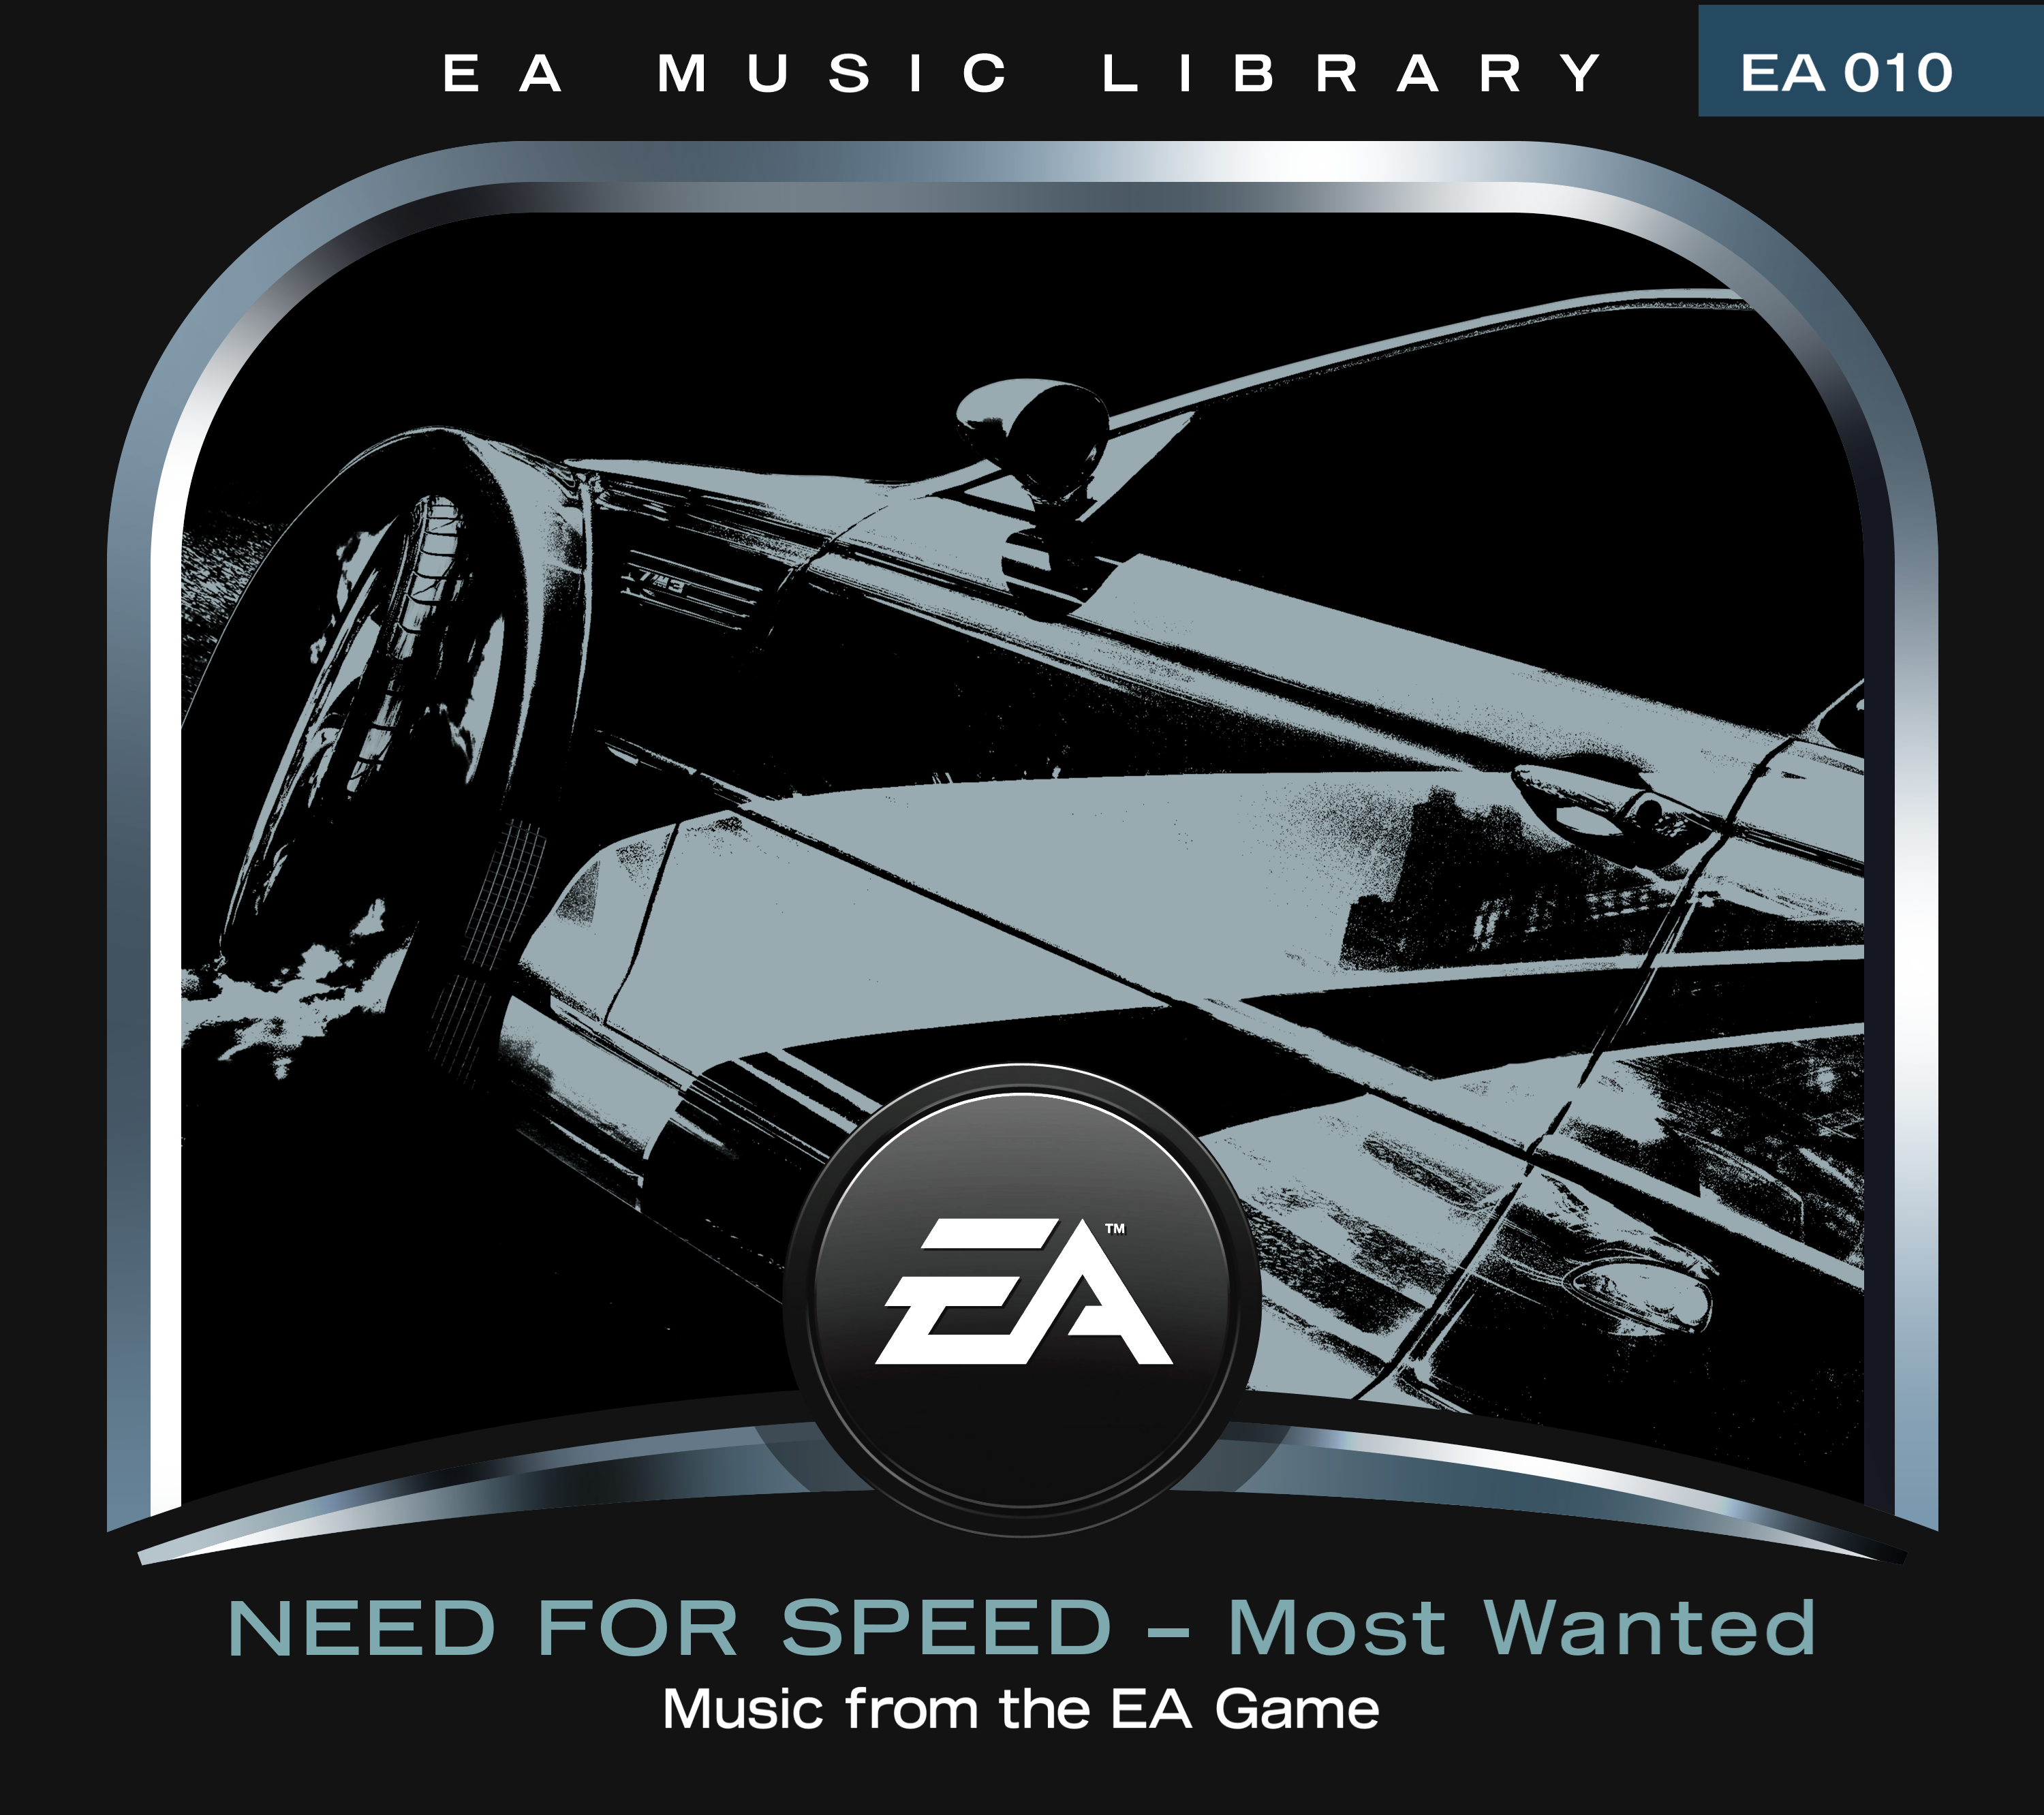 Скорость cd. Need for Speed most wanted диск. NFS most wanted обложка. Need for Speed most wanted саундтреки. NFS MW OST.